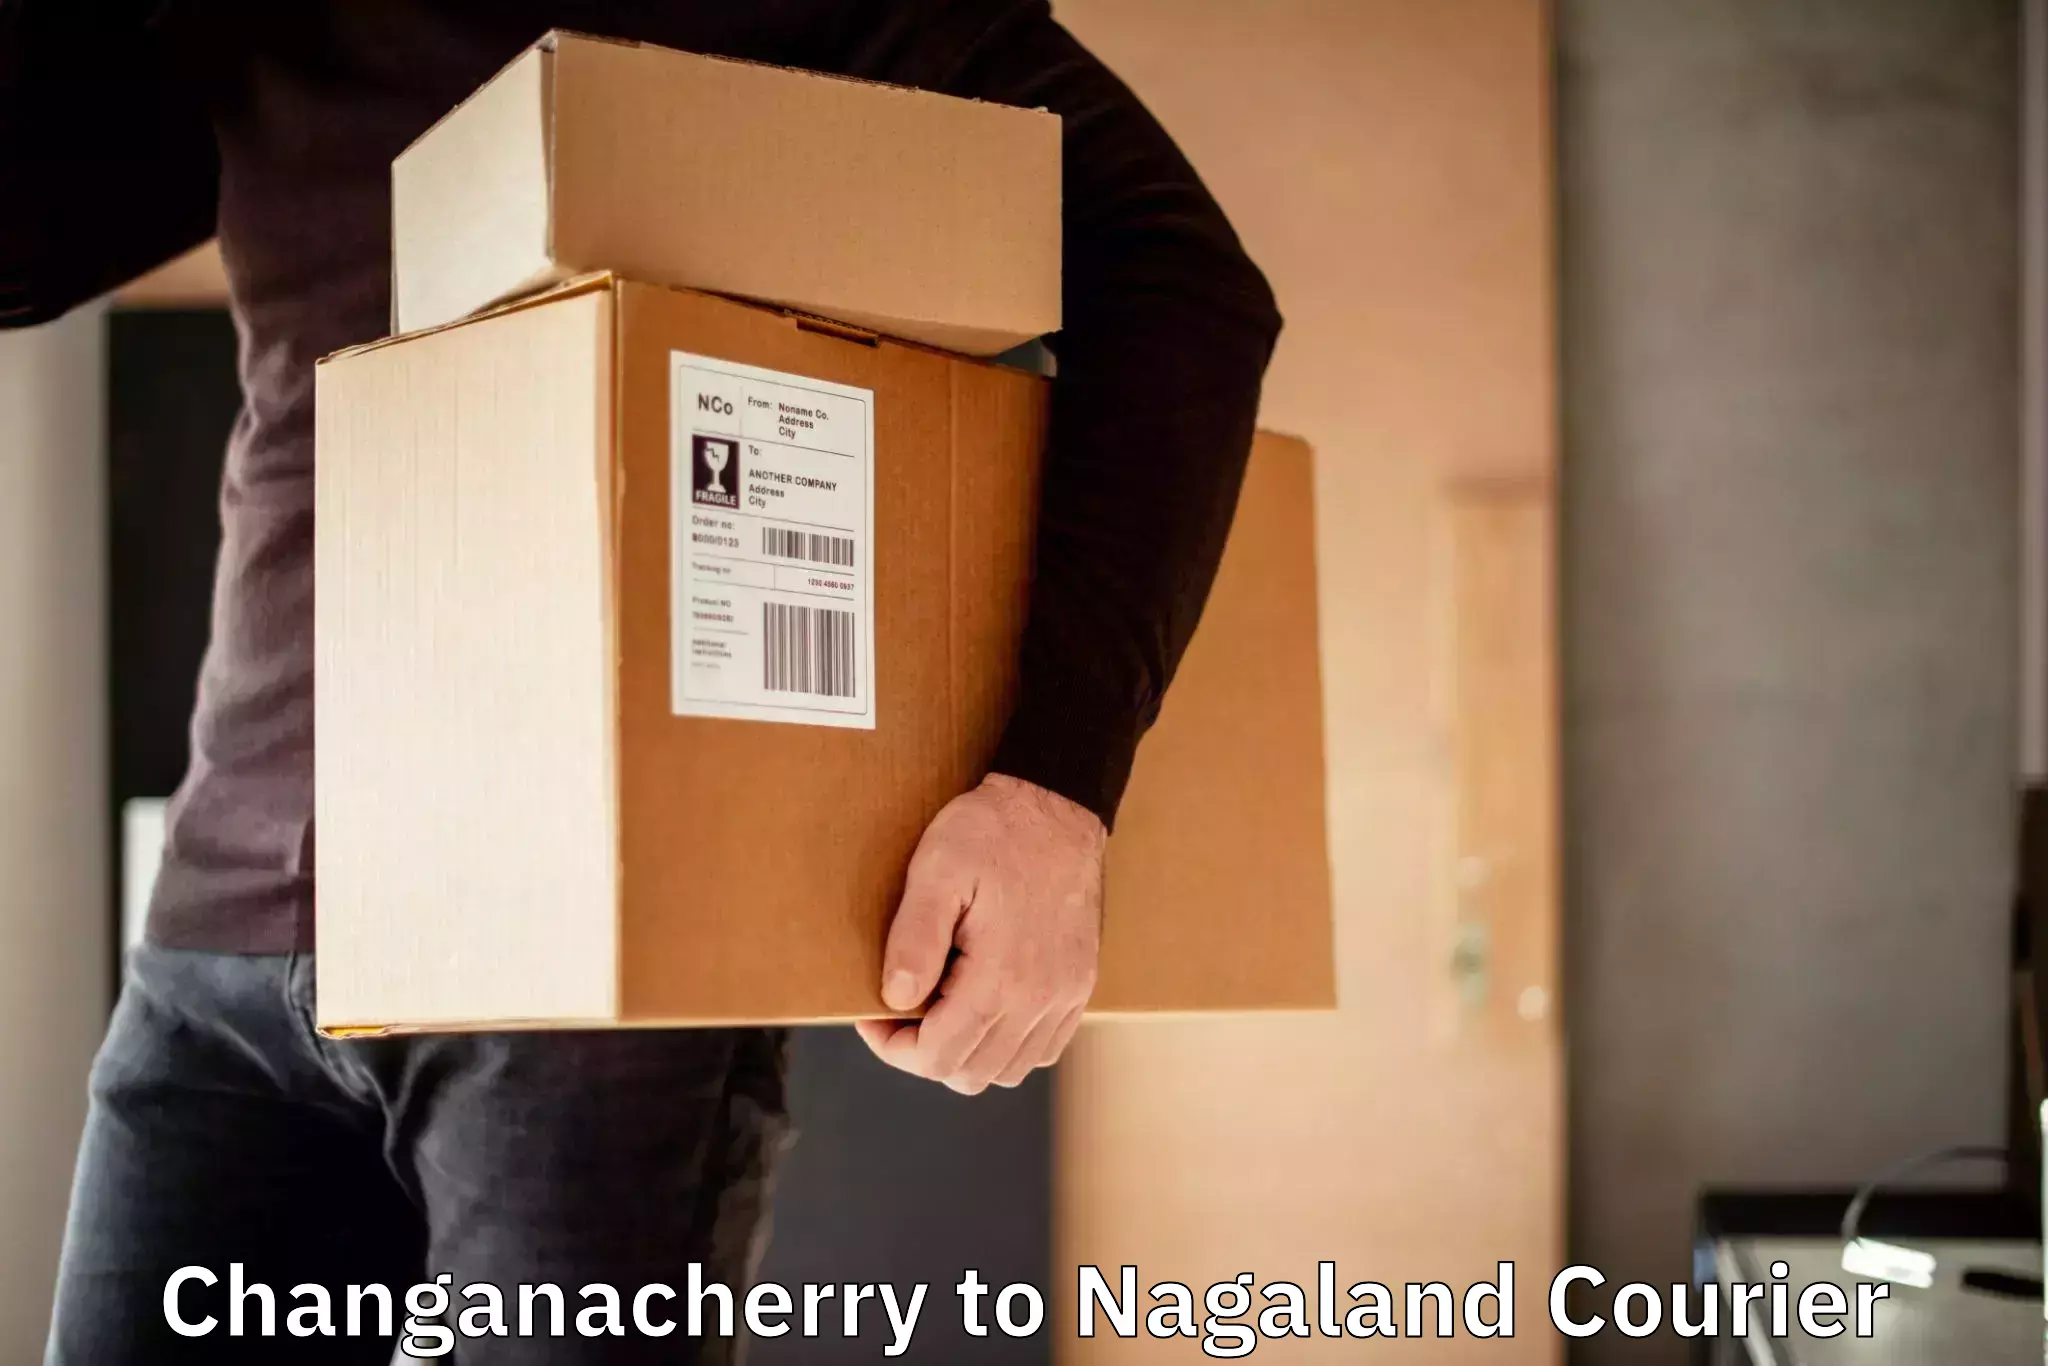 Same-day delivery options in Changanacherry to Nagaland